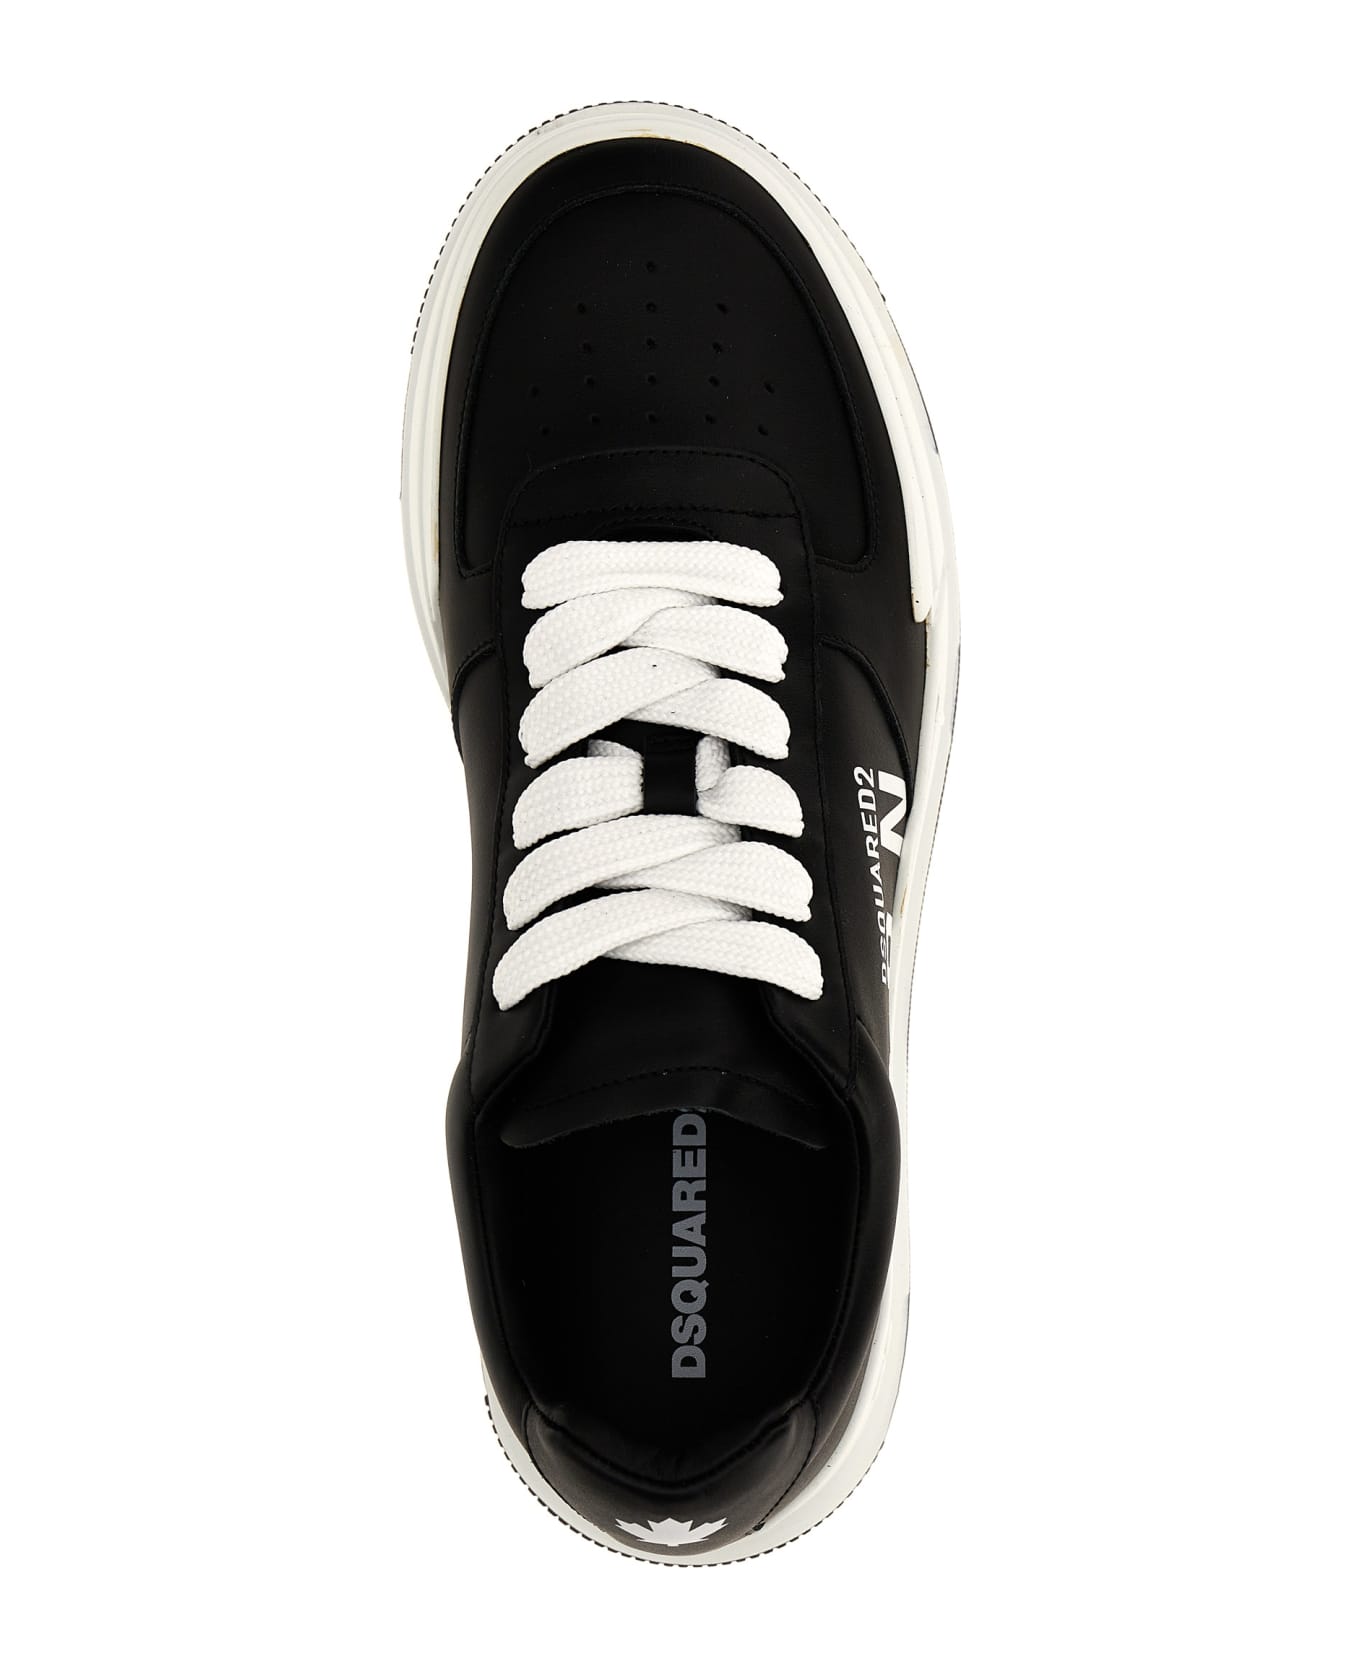 Dsquared2 'canadian' Sneakers - White/Black